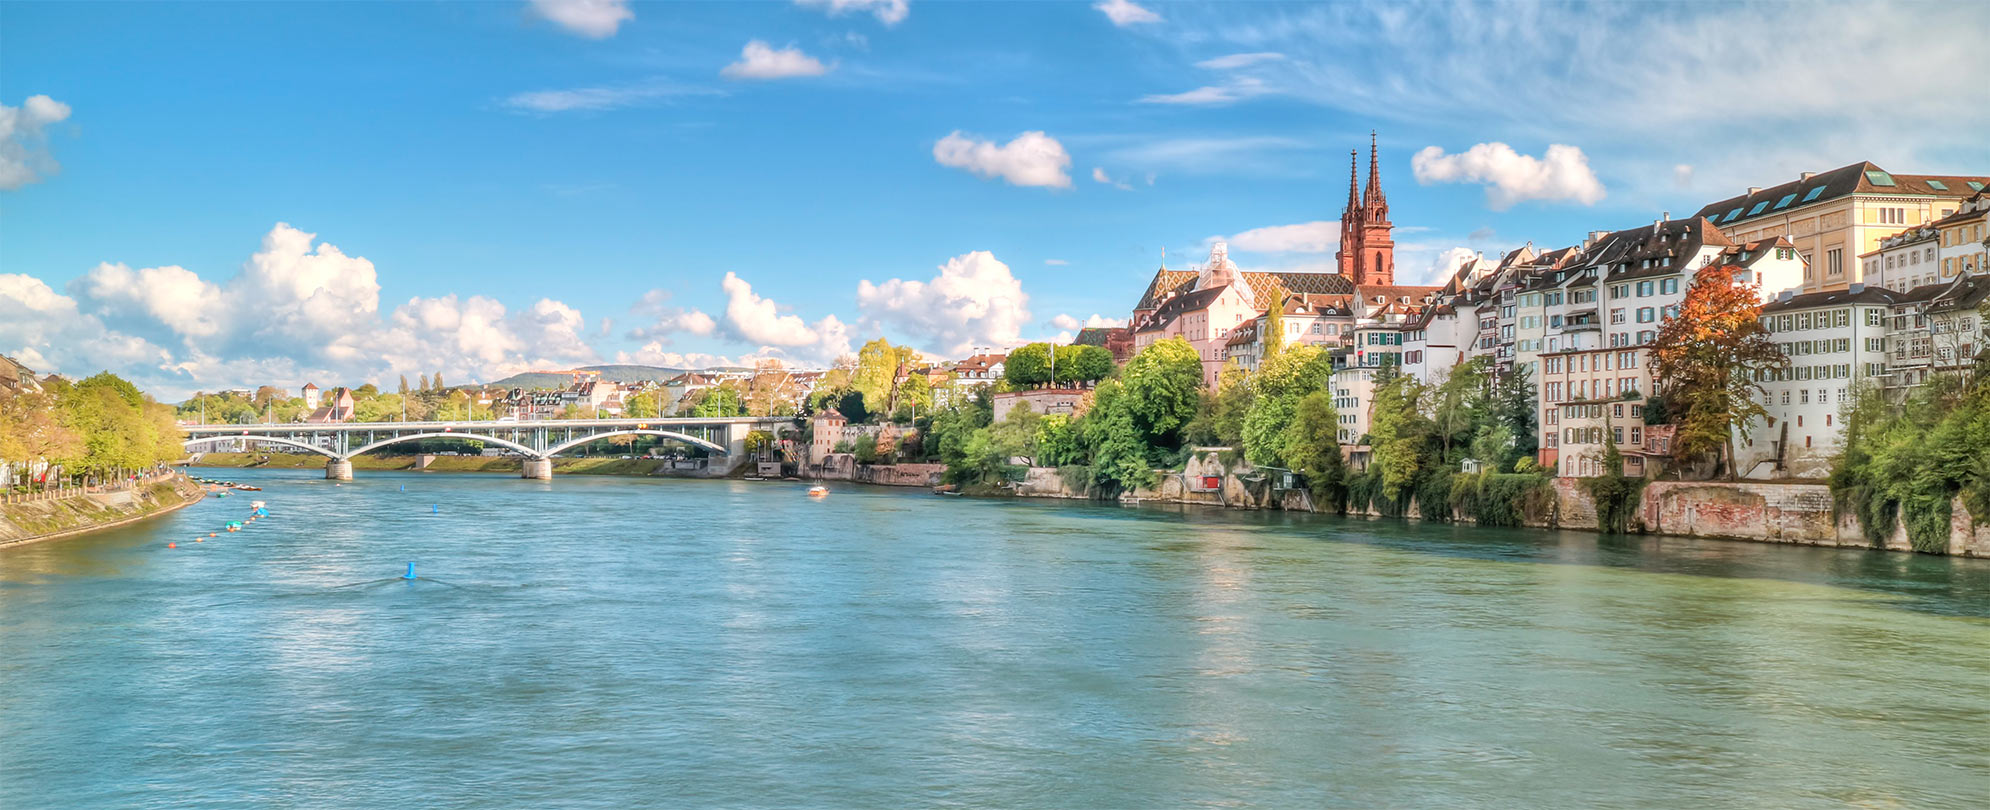 Panoramic view of the Rhine River in Switzerland with residential buildings in the background.